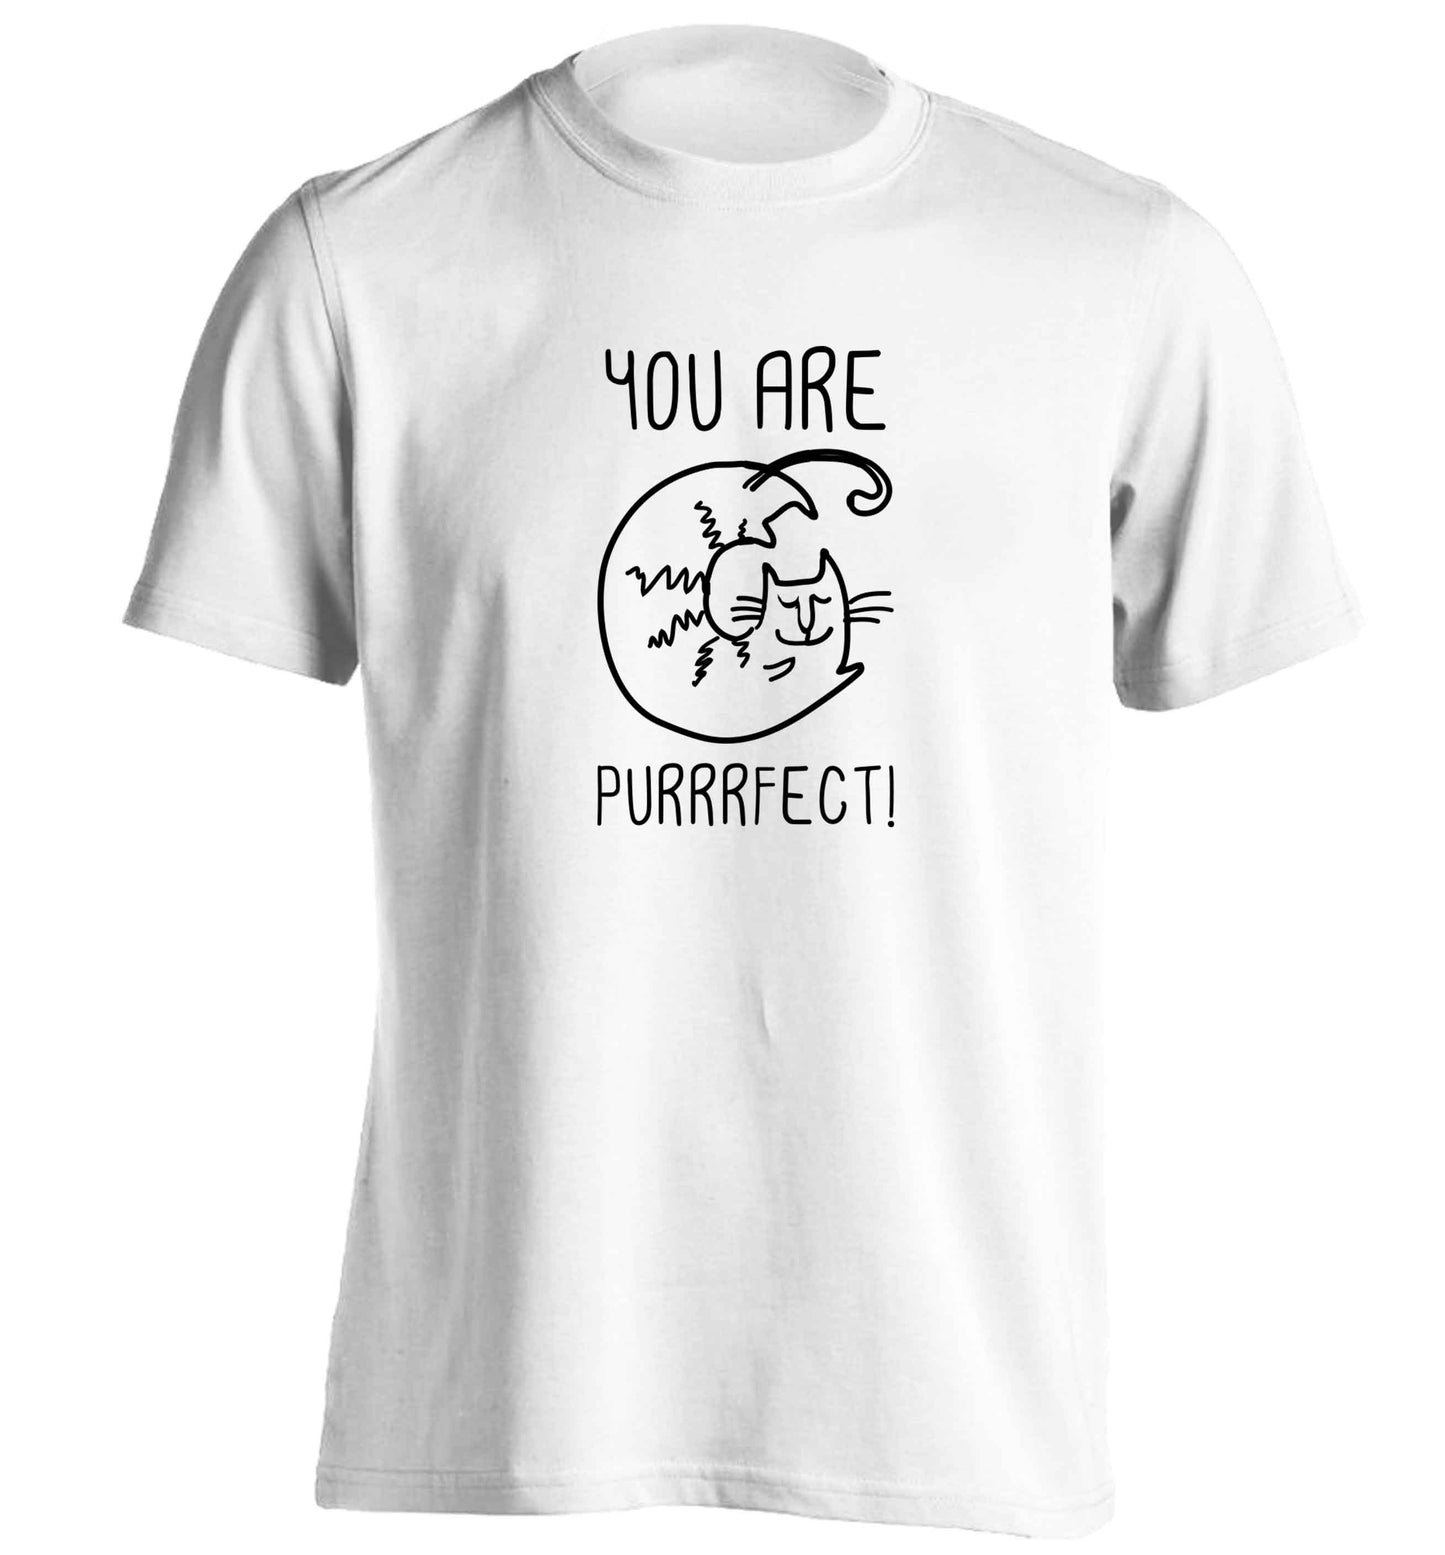 You are purrfect adults unisex white Tshirt 2XL